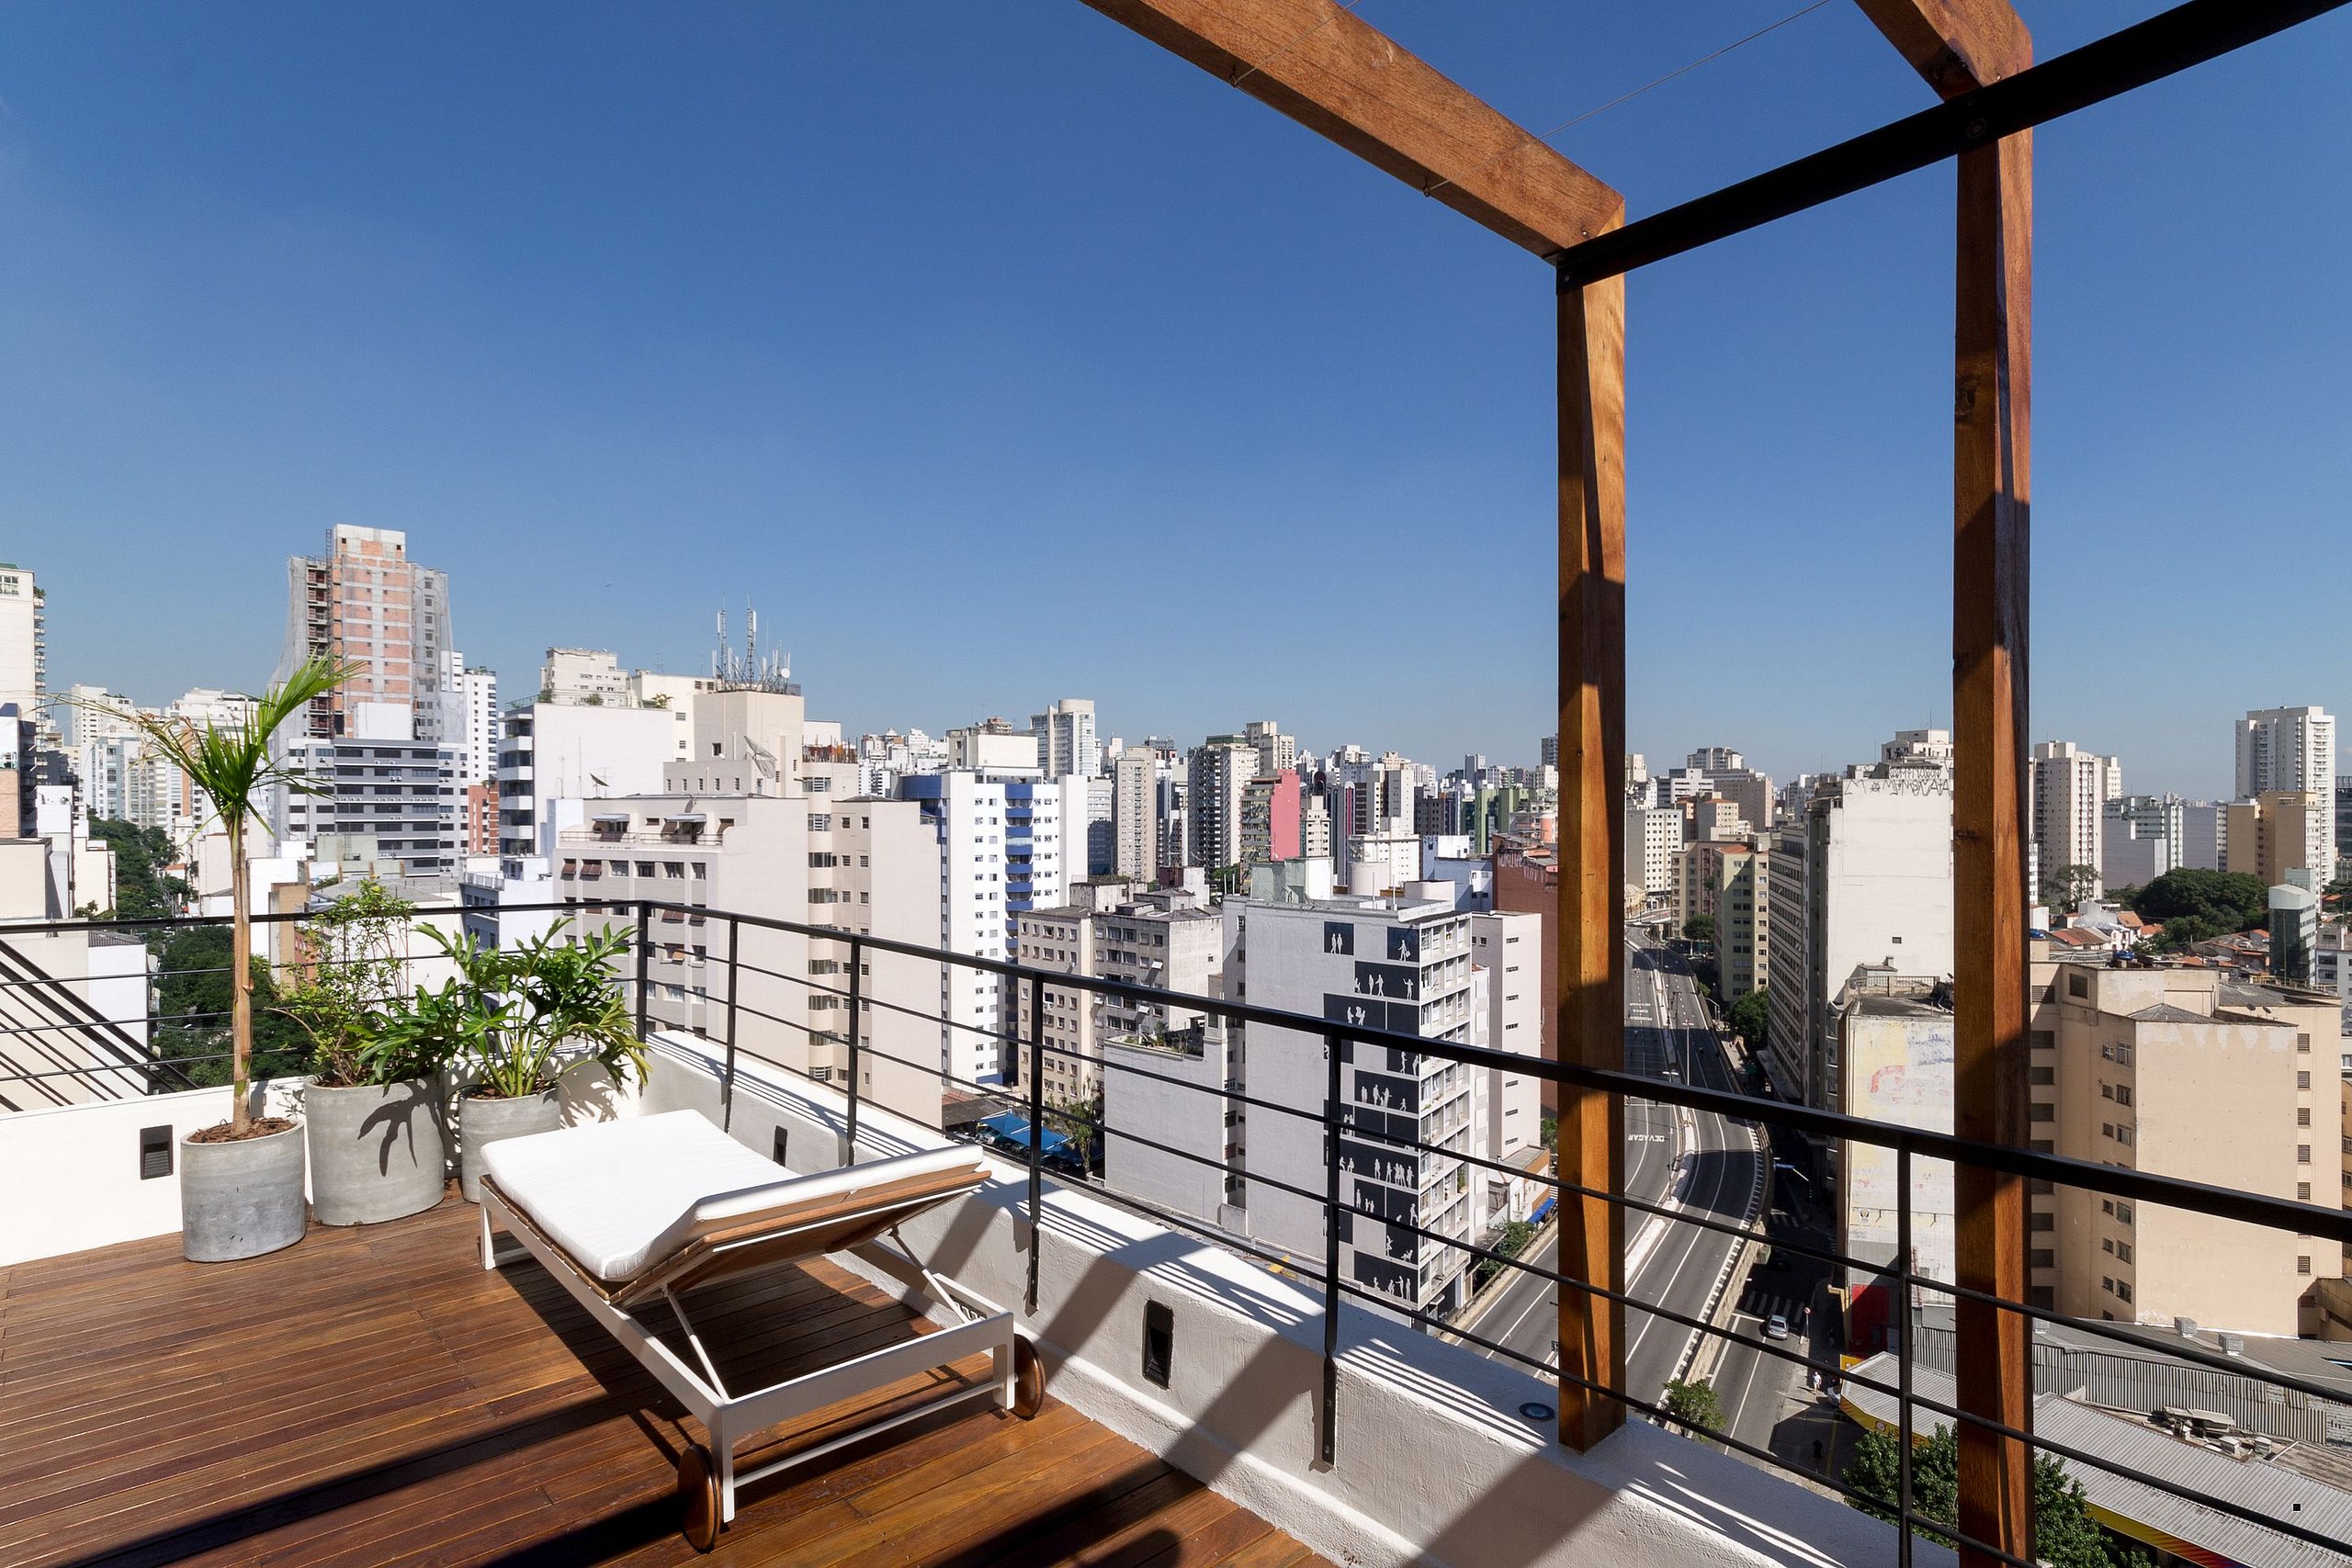 Property Image 1 - Beautiful penthouse in the lively district of Barra Funda